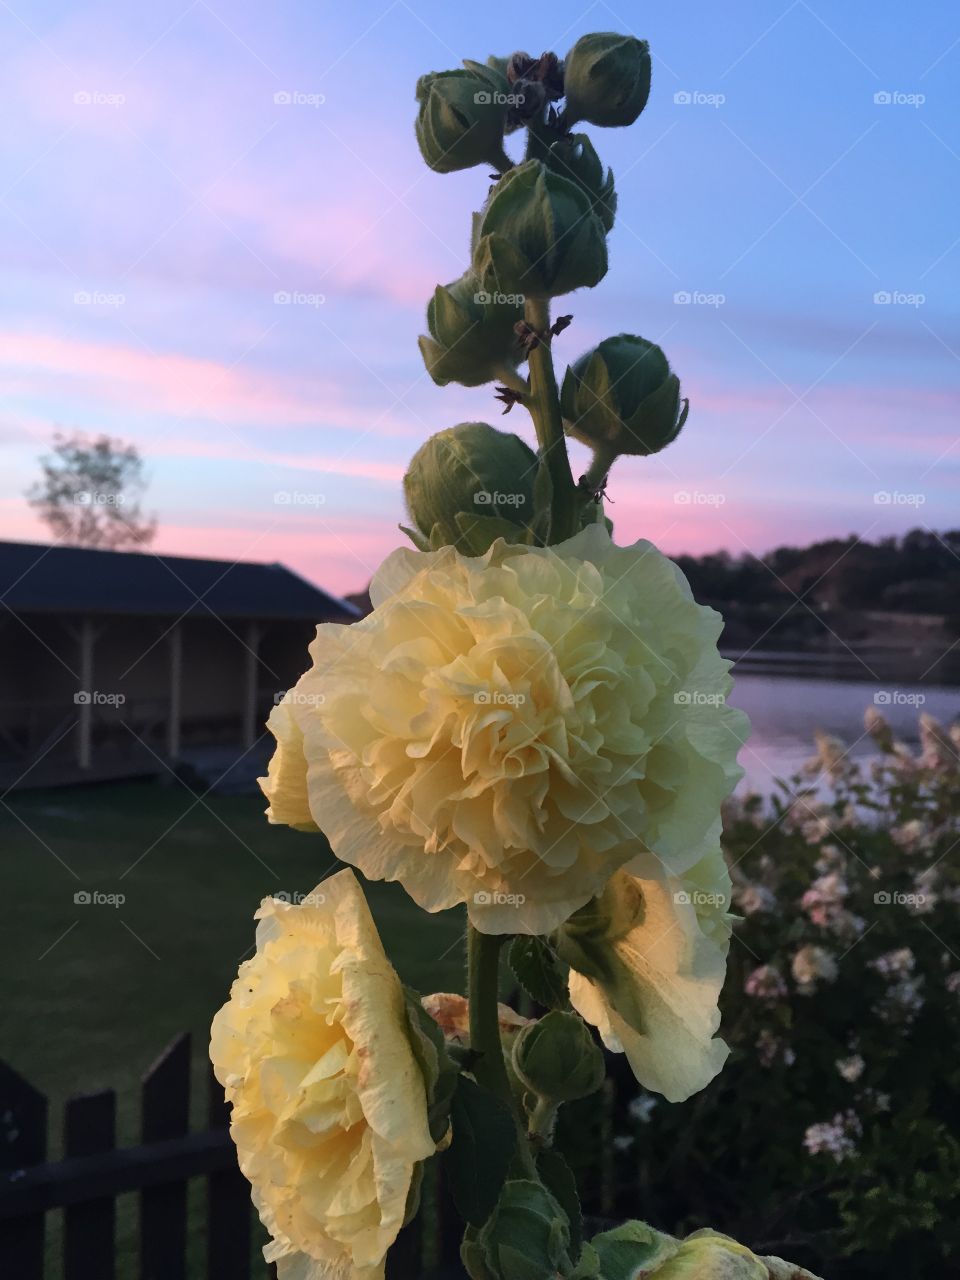 Flower in the evening